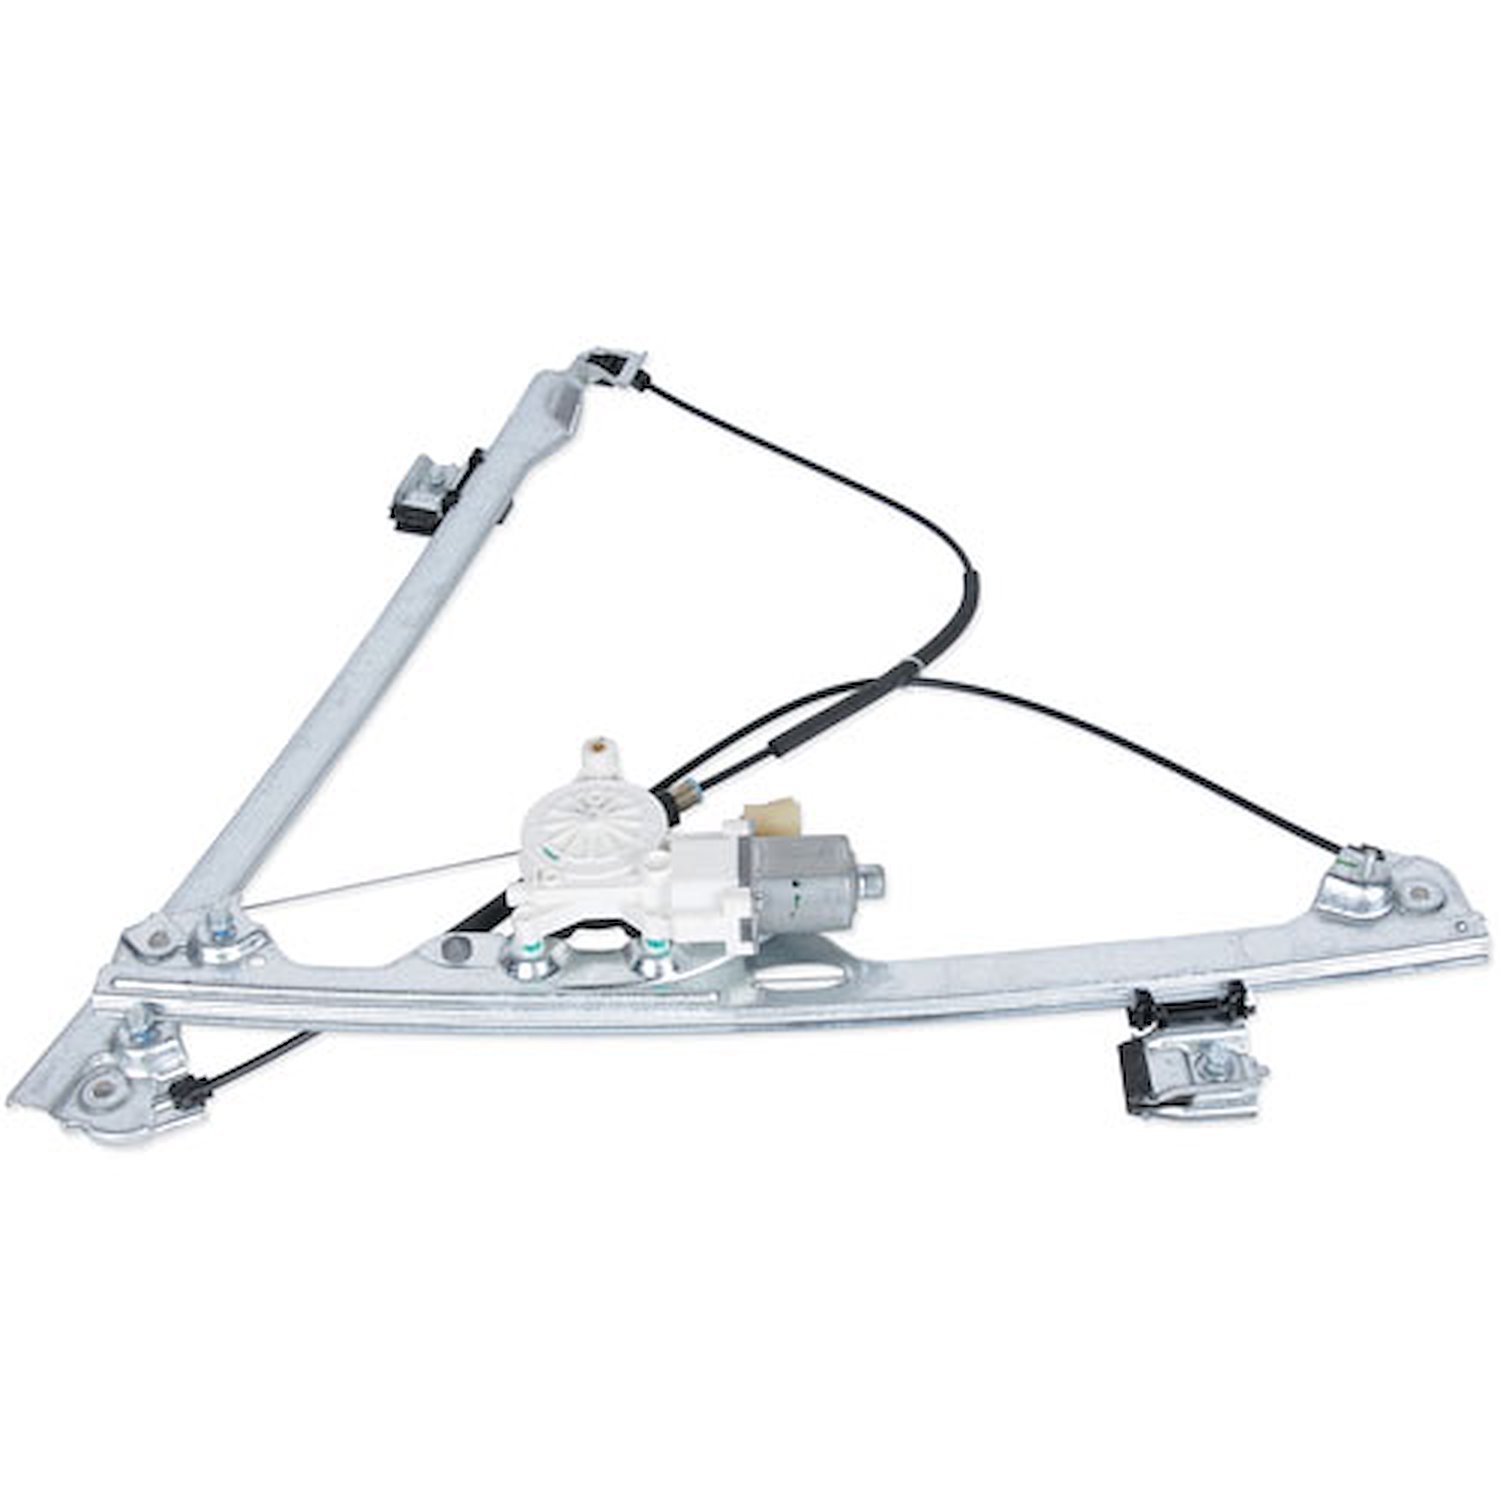 20945139 Front Power Window Regulator and Motor Assembly Fits Select 1999-2014 Cadillac, Chevrolet, GMC Models